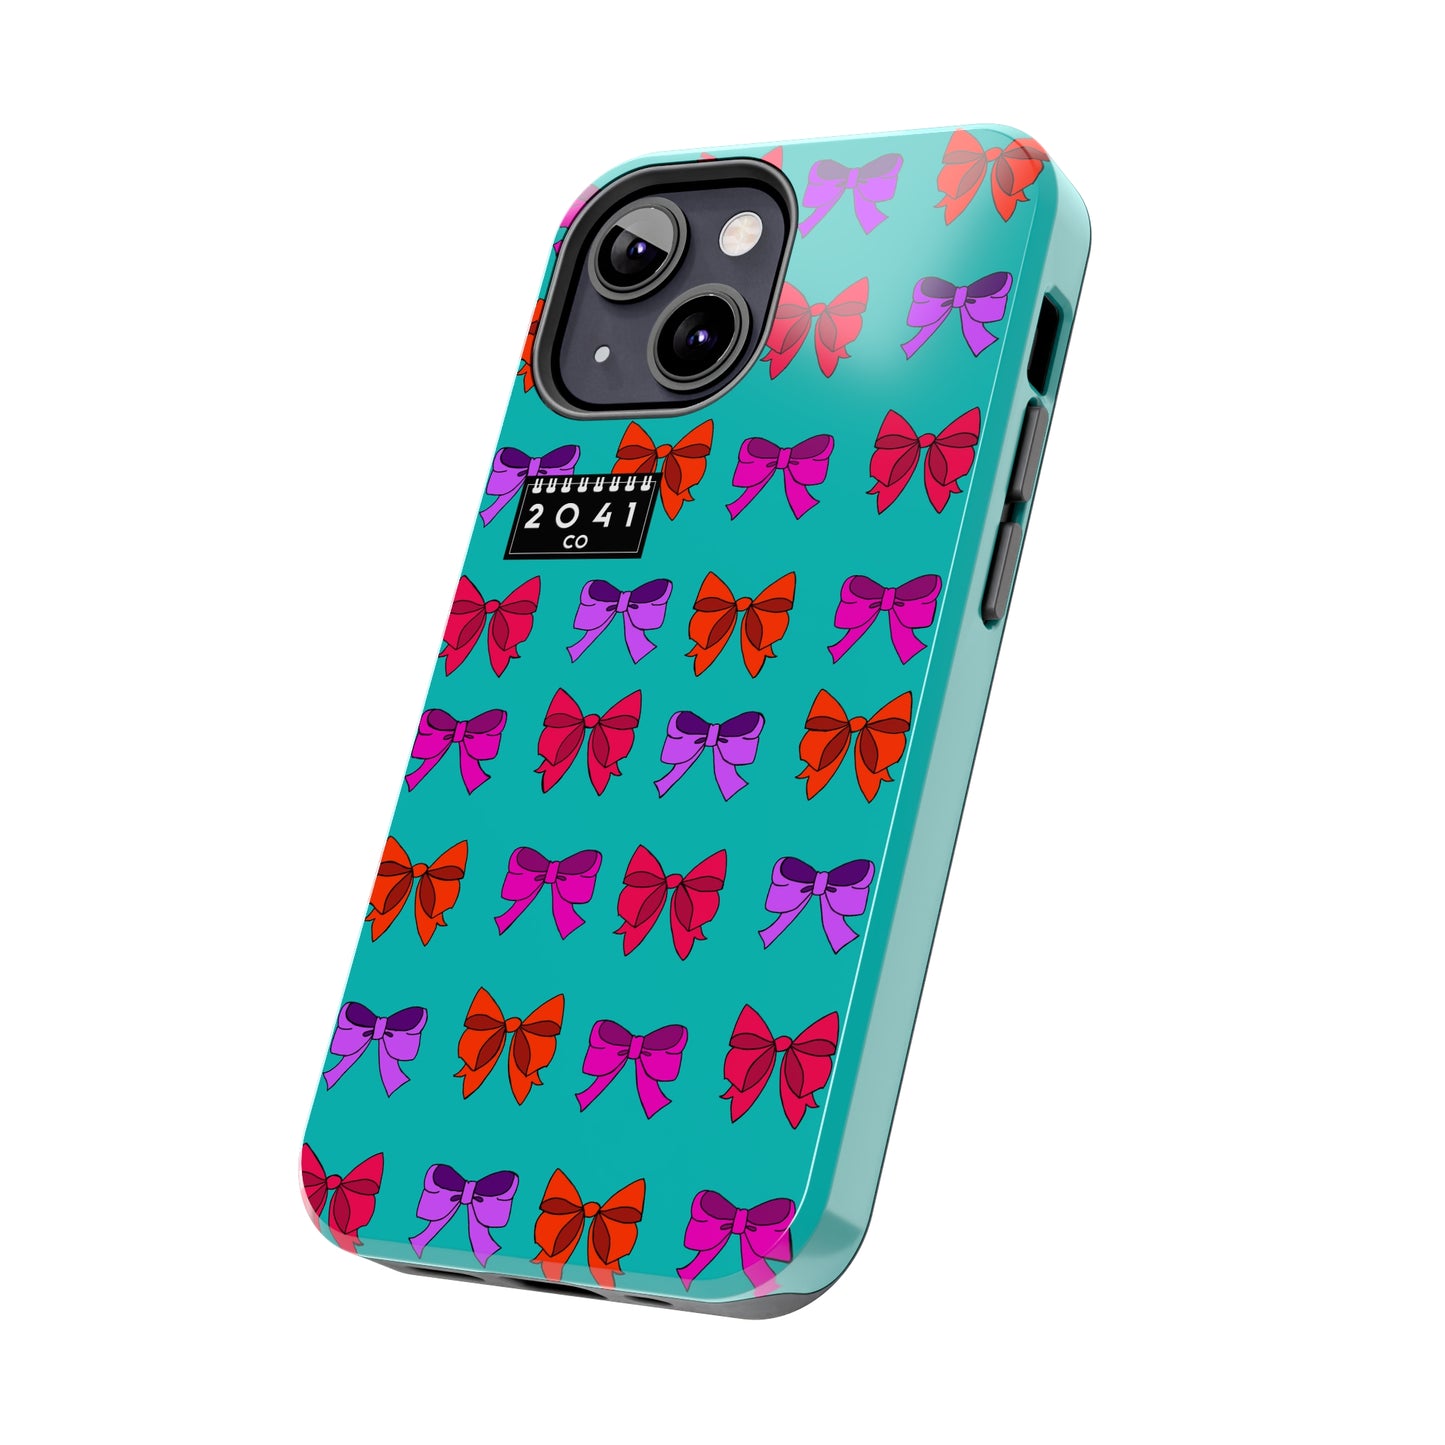 2041 CO IPHONE CASE | BOWS